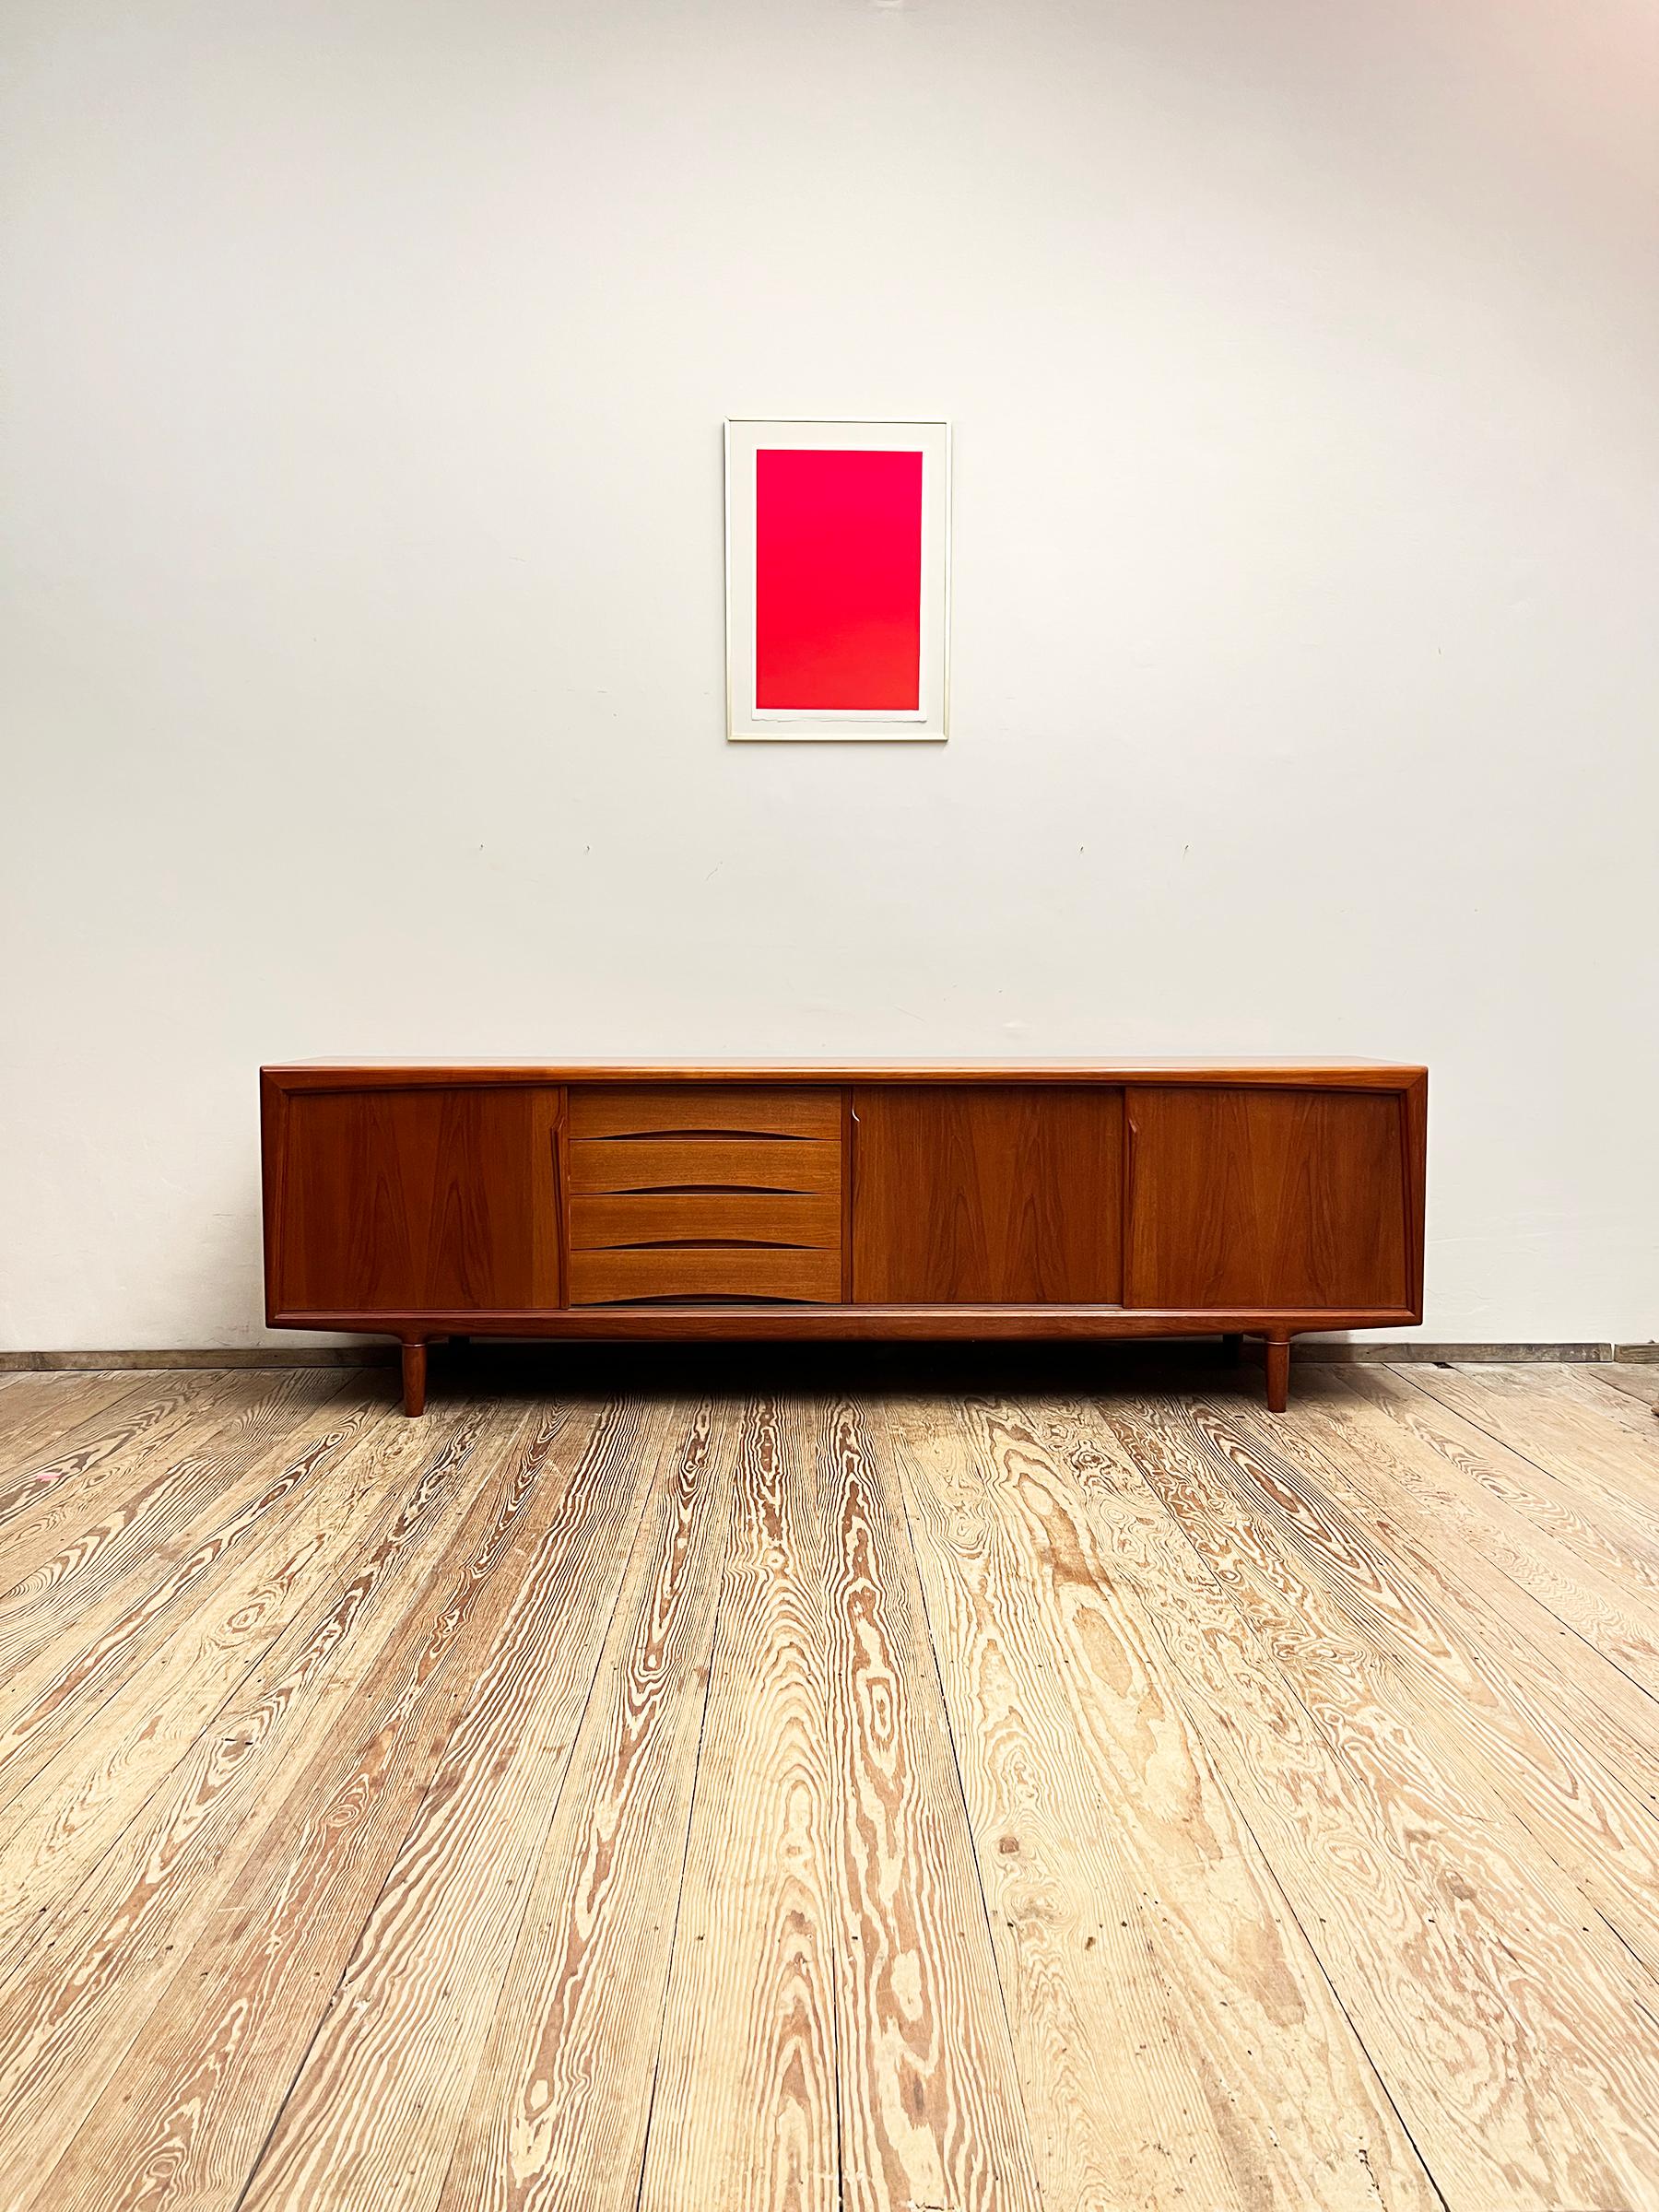 Dimensions: 240x47x80 cm (Width x Depth x Height)

This Scandinavian mid century modern teak credenza was manufactured in the 1950s by Axel Christensen Odder or ACO in Denmark.

It shows exquisite Danish craftsmanship and offers plenty of storage